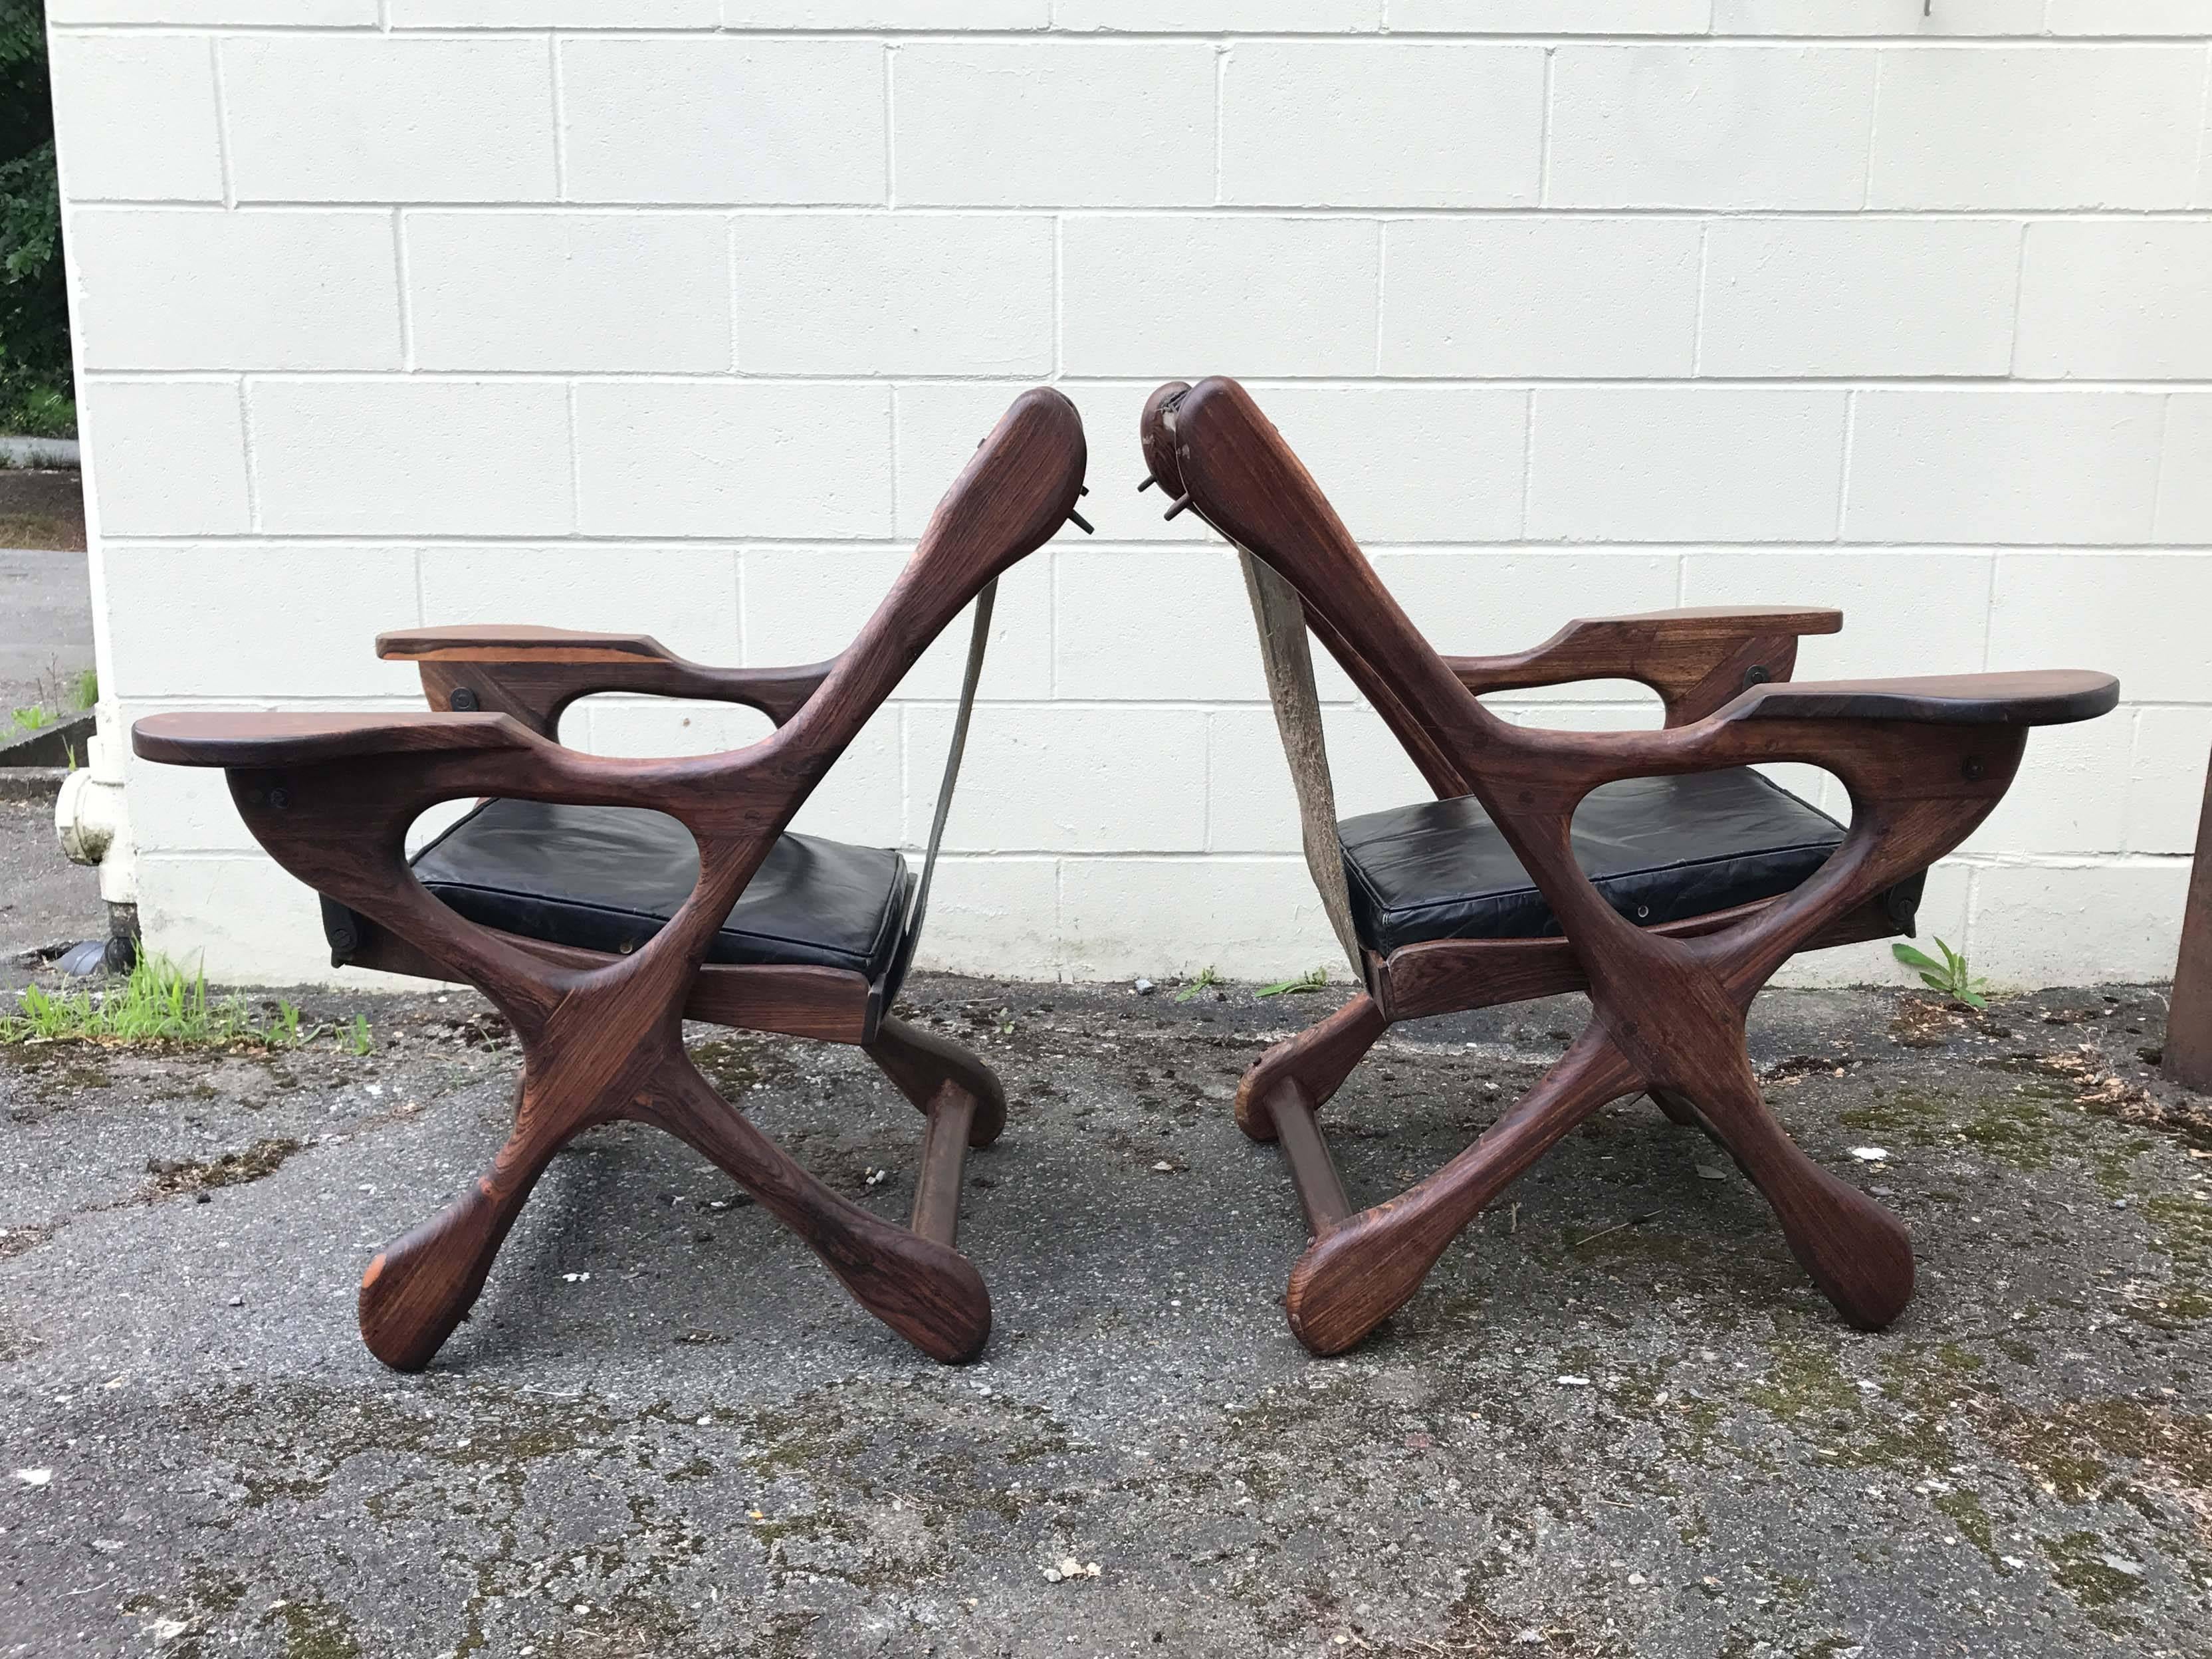 Swinger sling chairs by Don Shoemaker. This iconic chair features doweled joints, handcrafted hardware and original leather upholstery. Some minor repairs and wear consistent with age and use, please see photos.

 